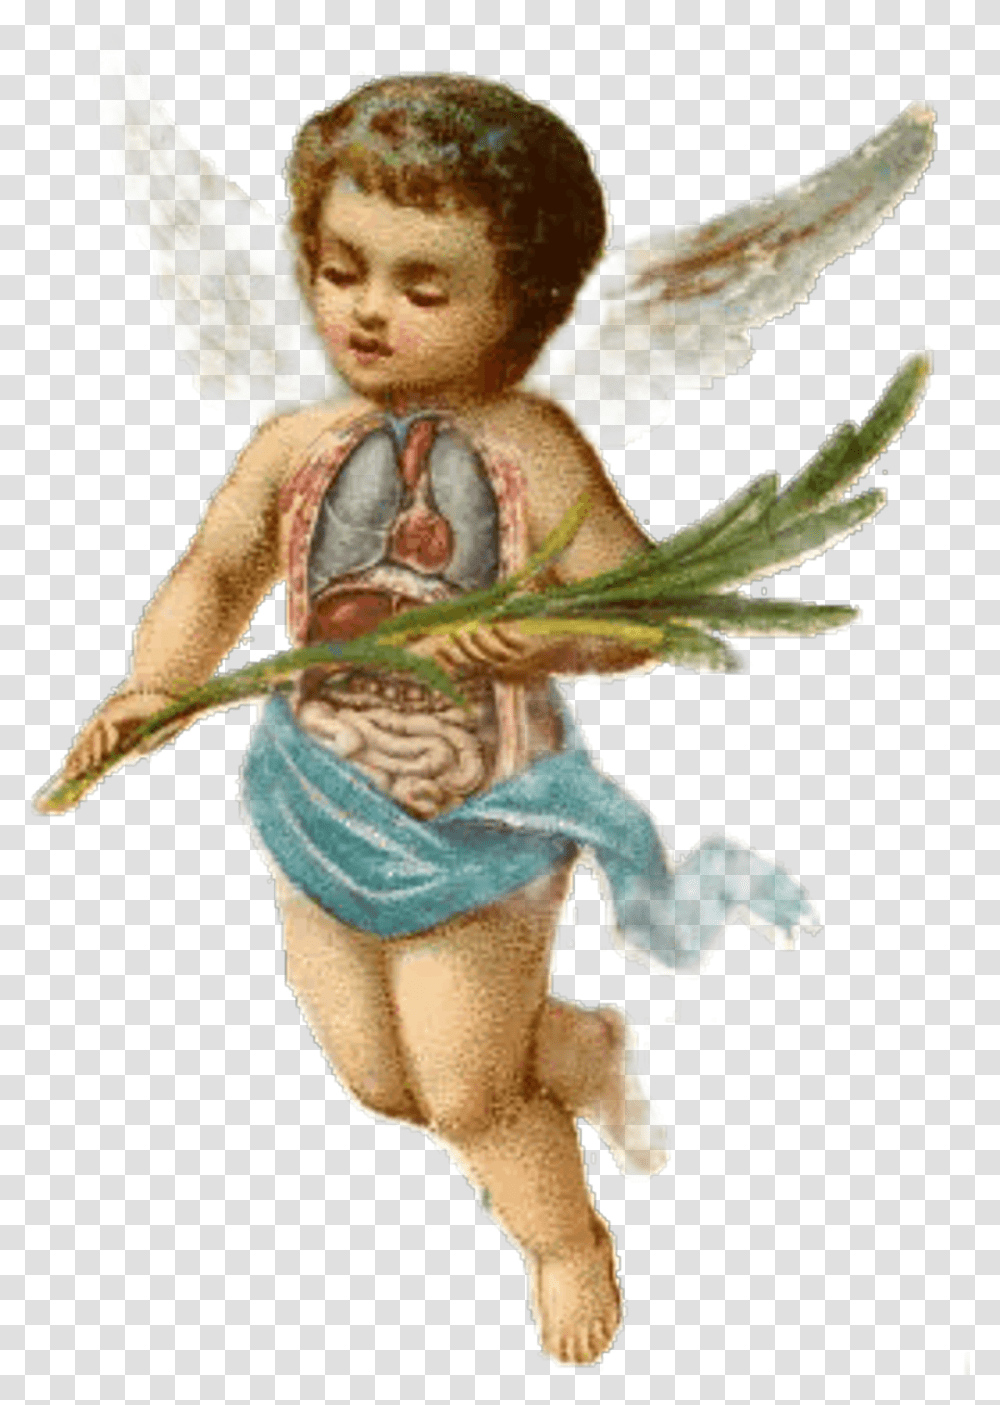 Download Cherub Sticker Baby Boy Angels Image With No Christmas Angel Illustration Vintage, Art, Archangel, Cupid, Person Transparent Png